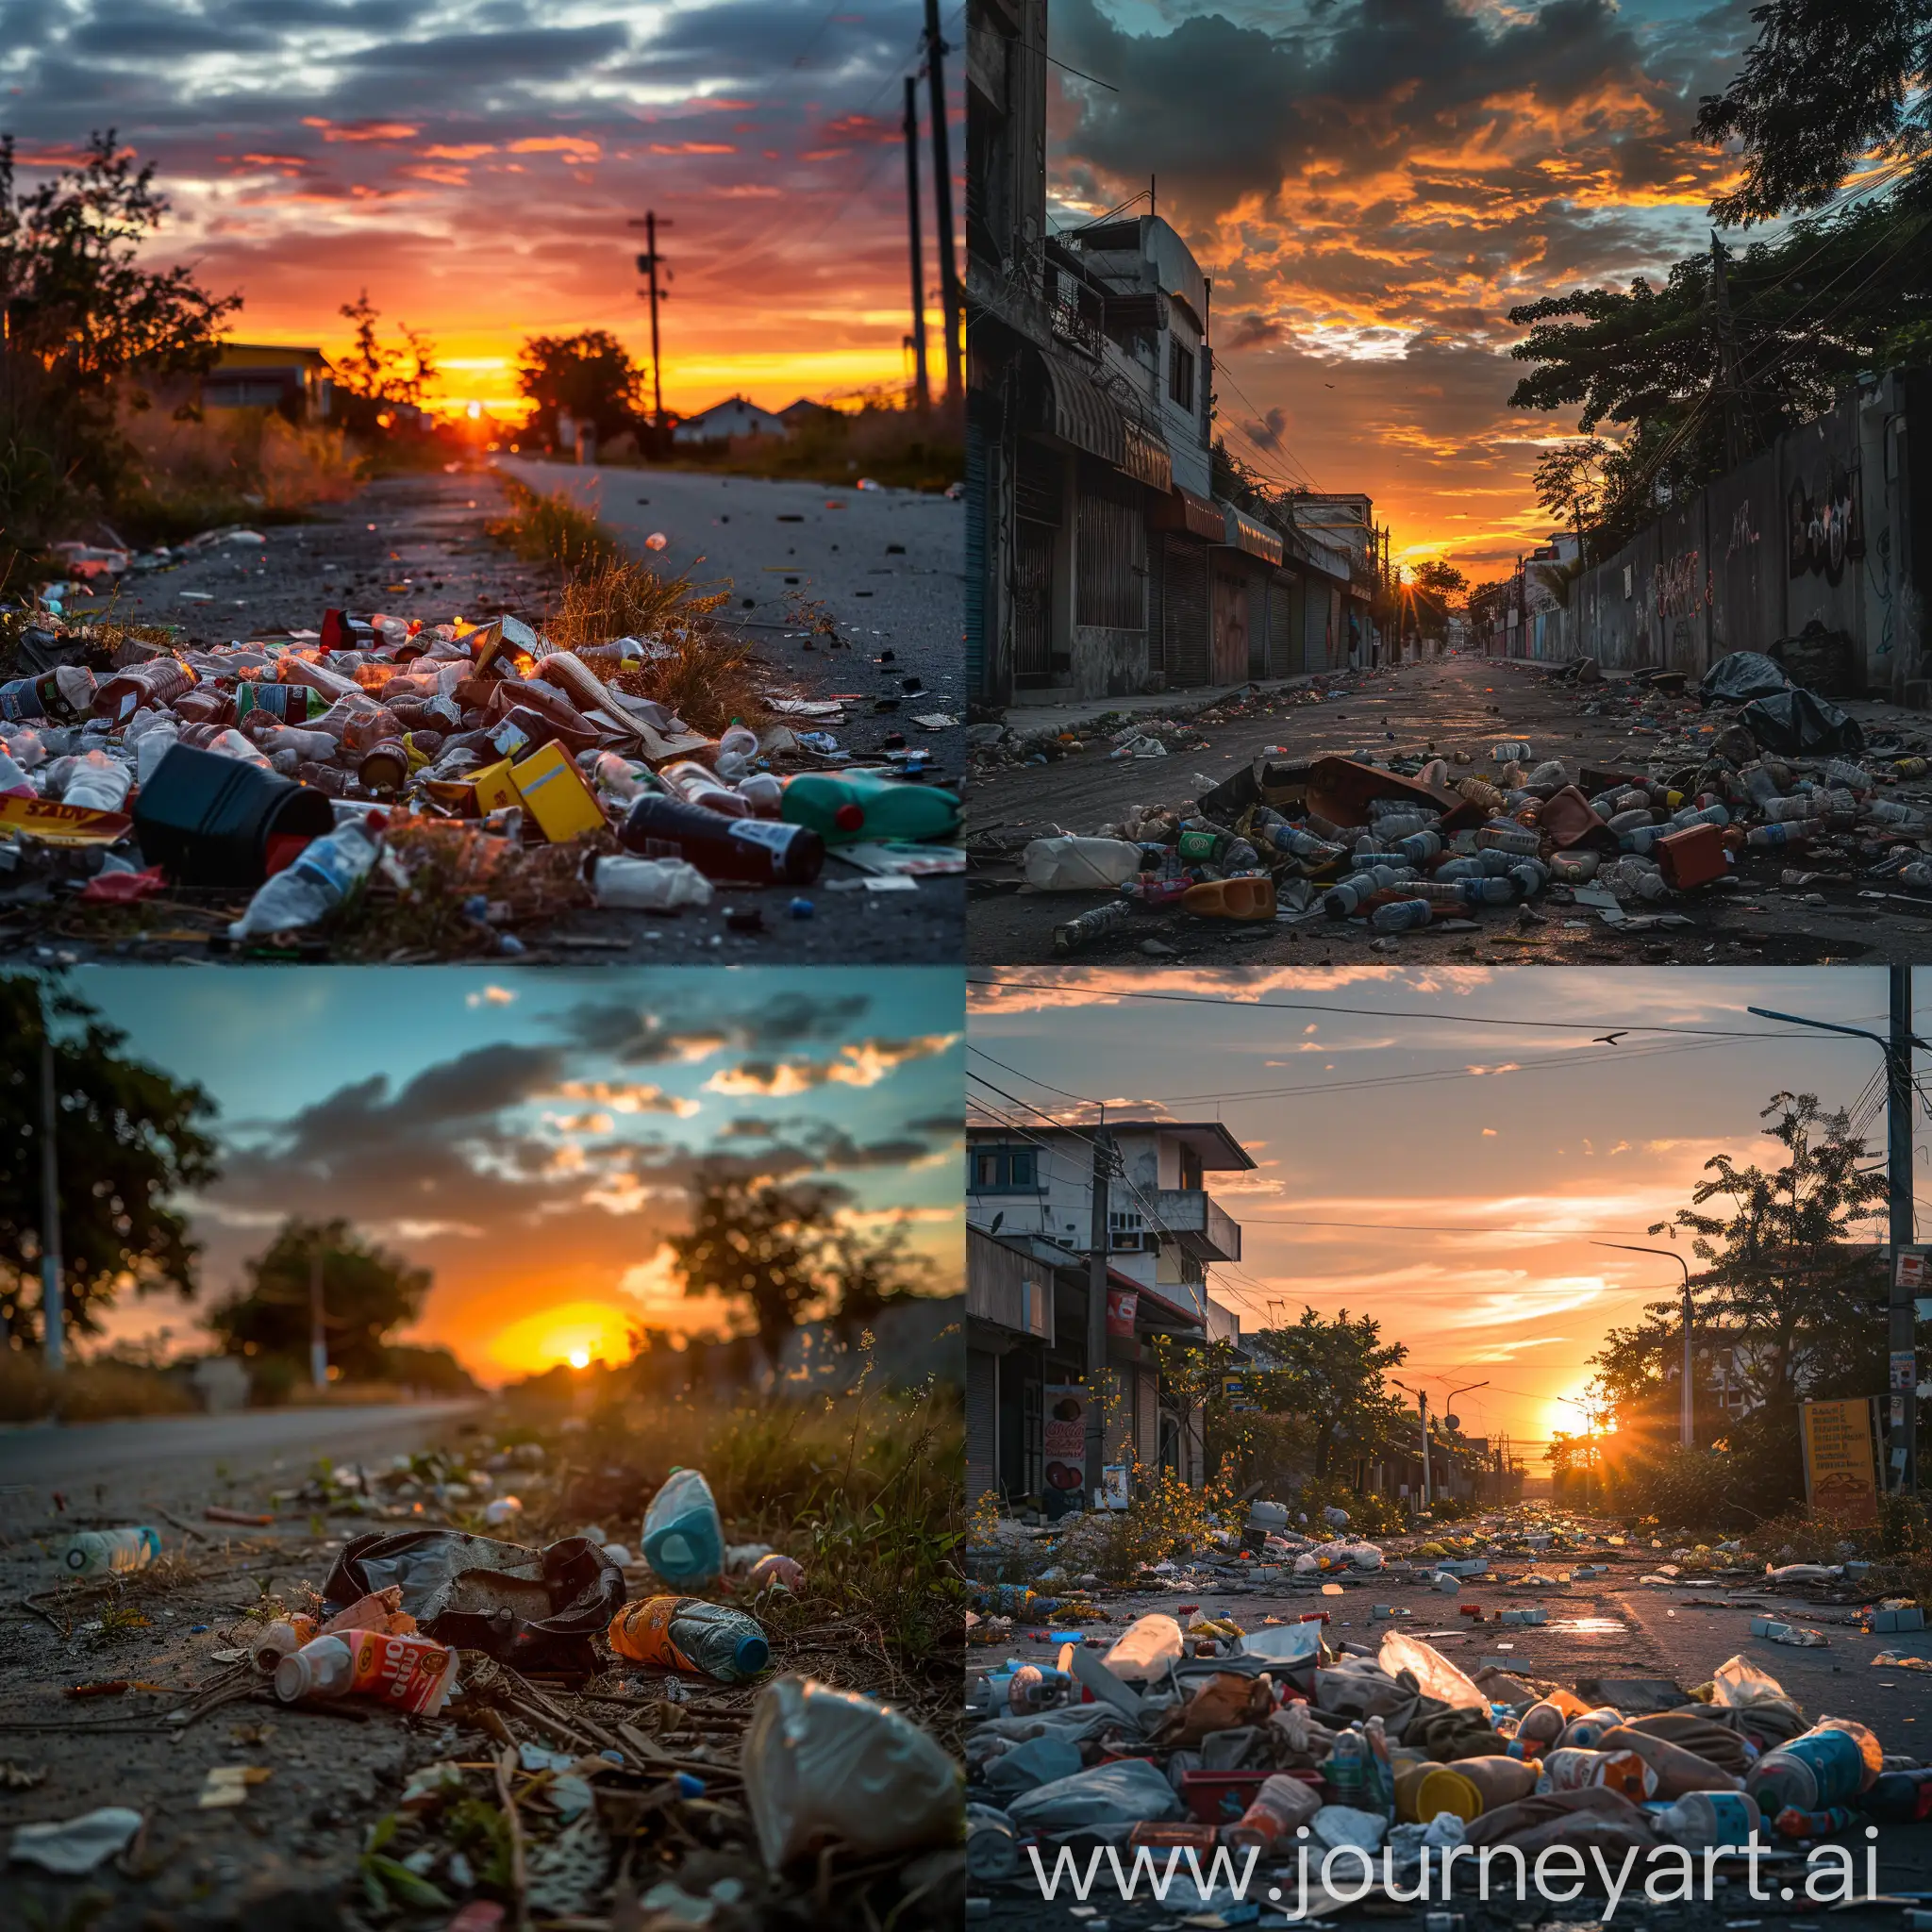 Urban-Sunset-Trash-on-the-Streets-at-Dusk